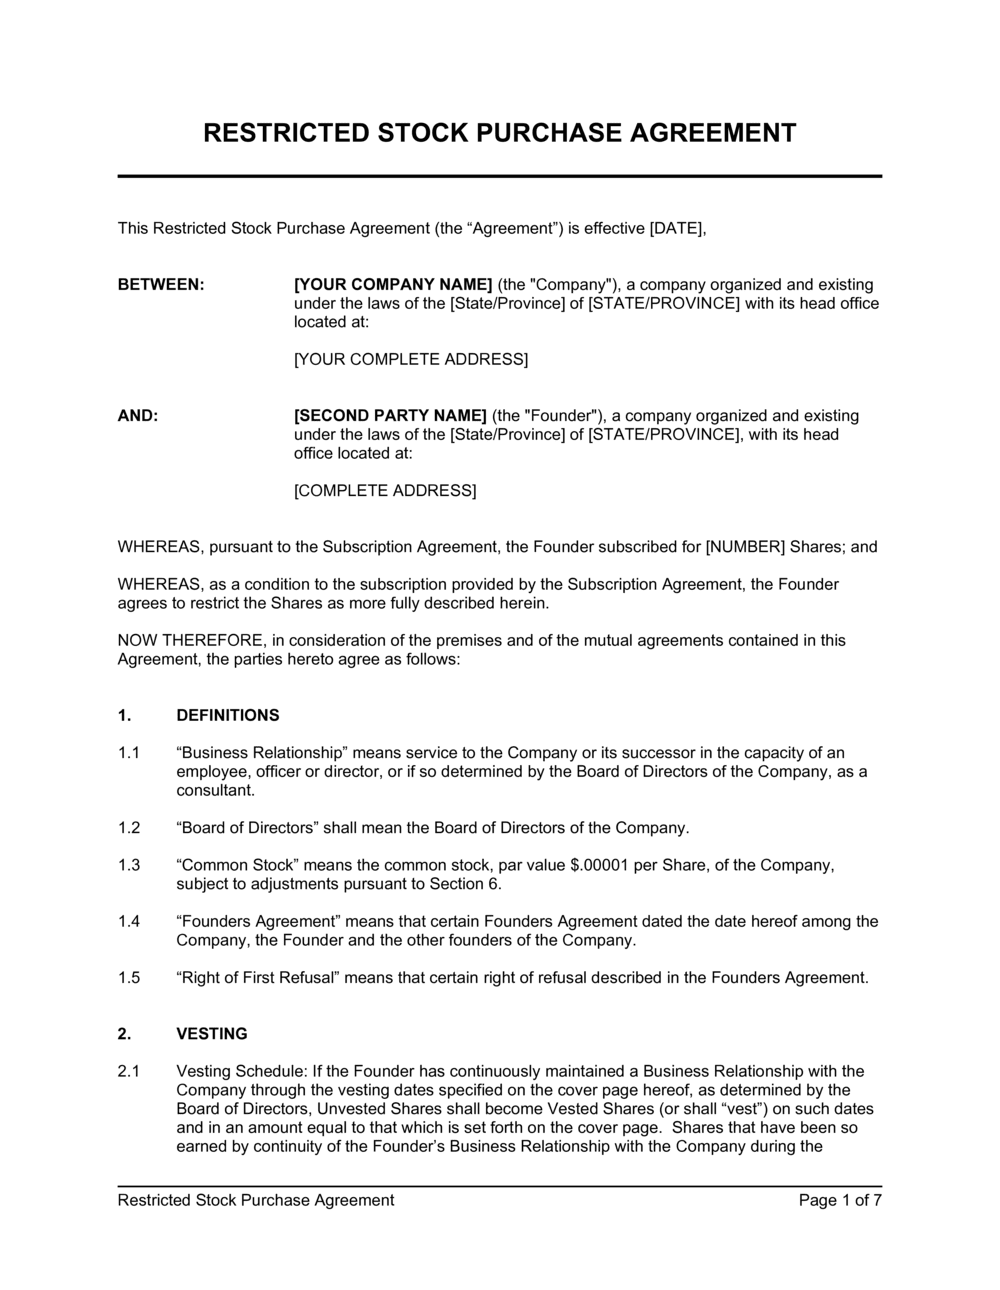 Restricted Stock Purchase Agreement Template  by Business-in-a-Box™ For restricted stock purchase agreement template